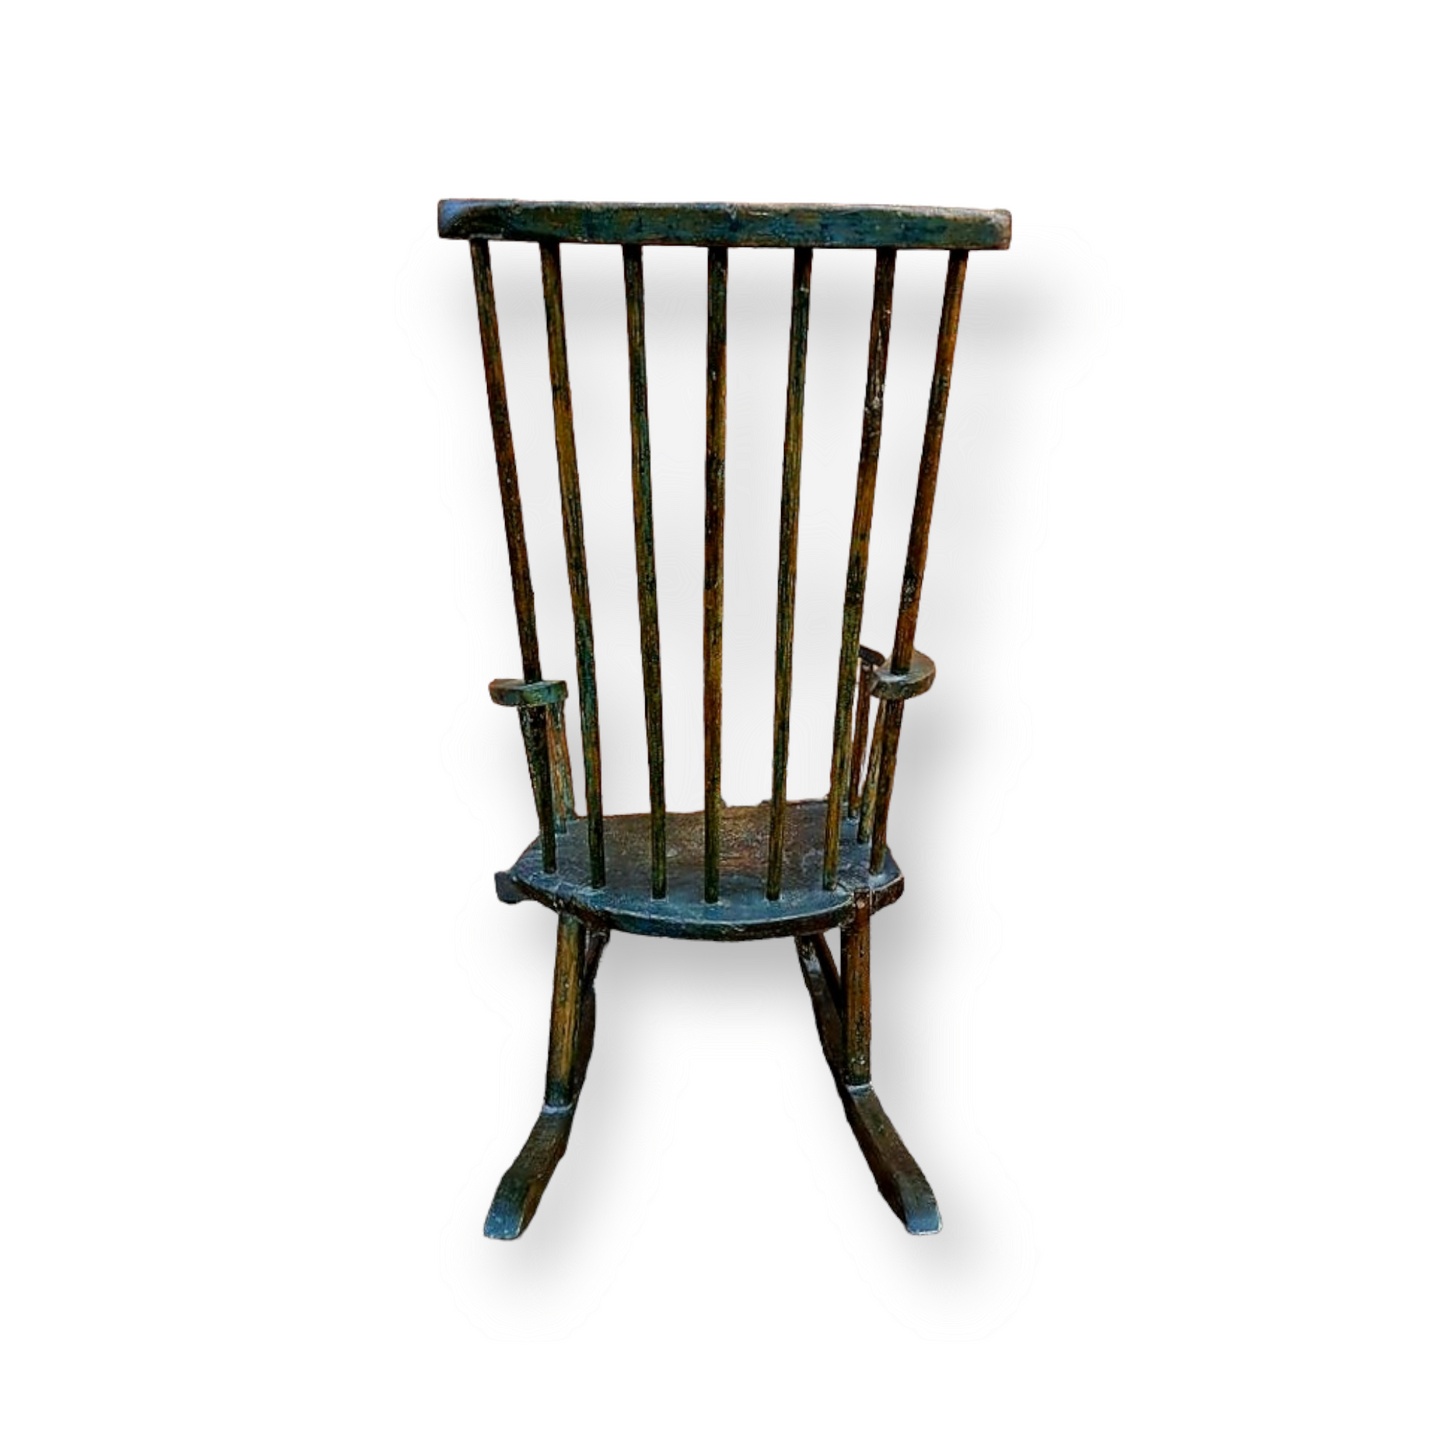 Late 18thC Primitive English Antique Comb Back Windsor Rocking Chair / Armchair